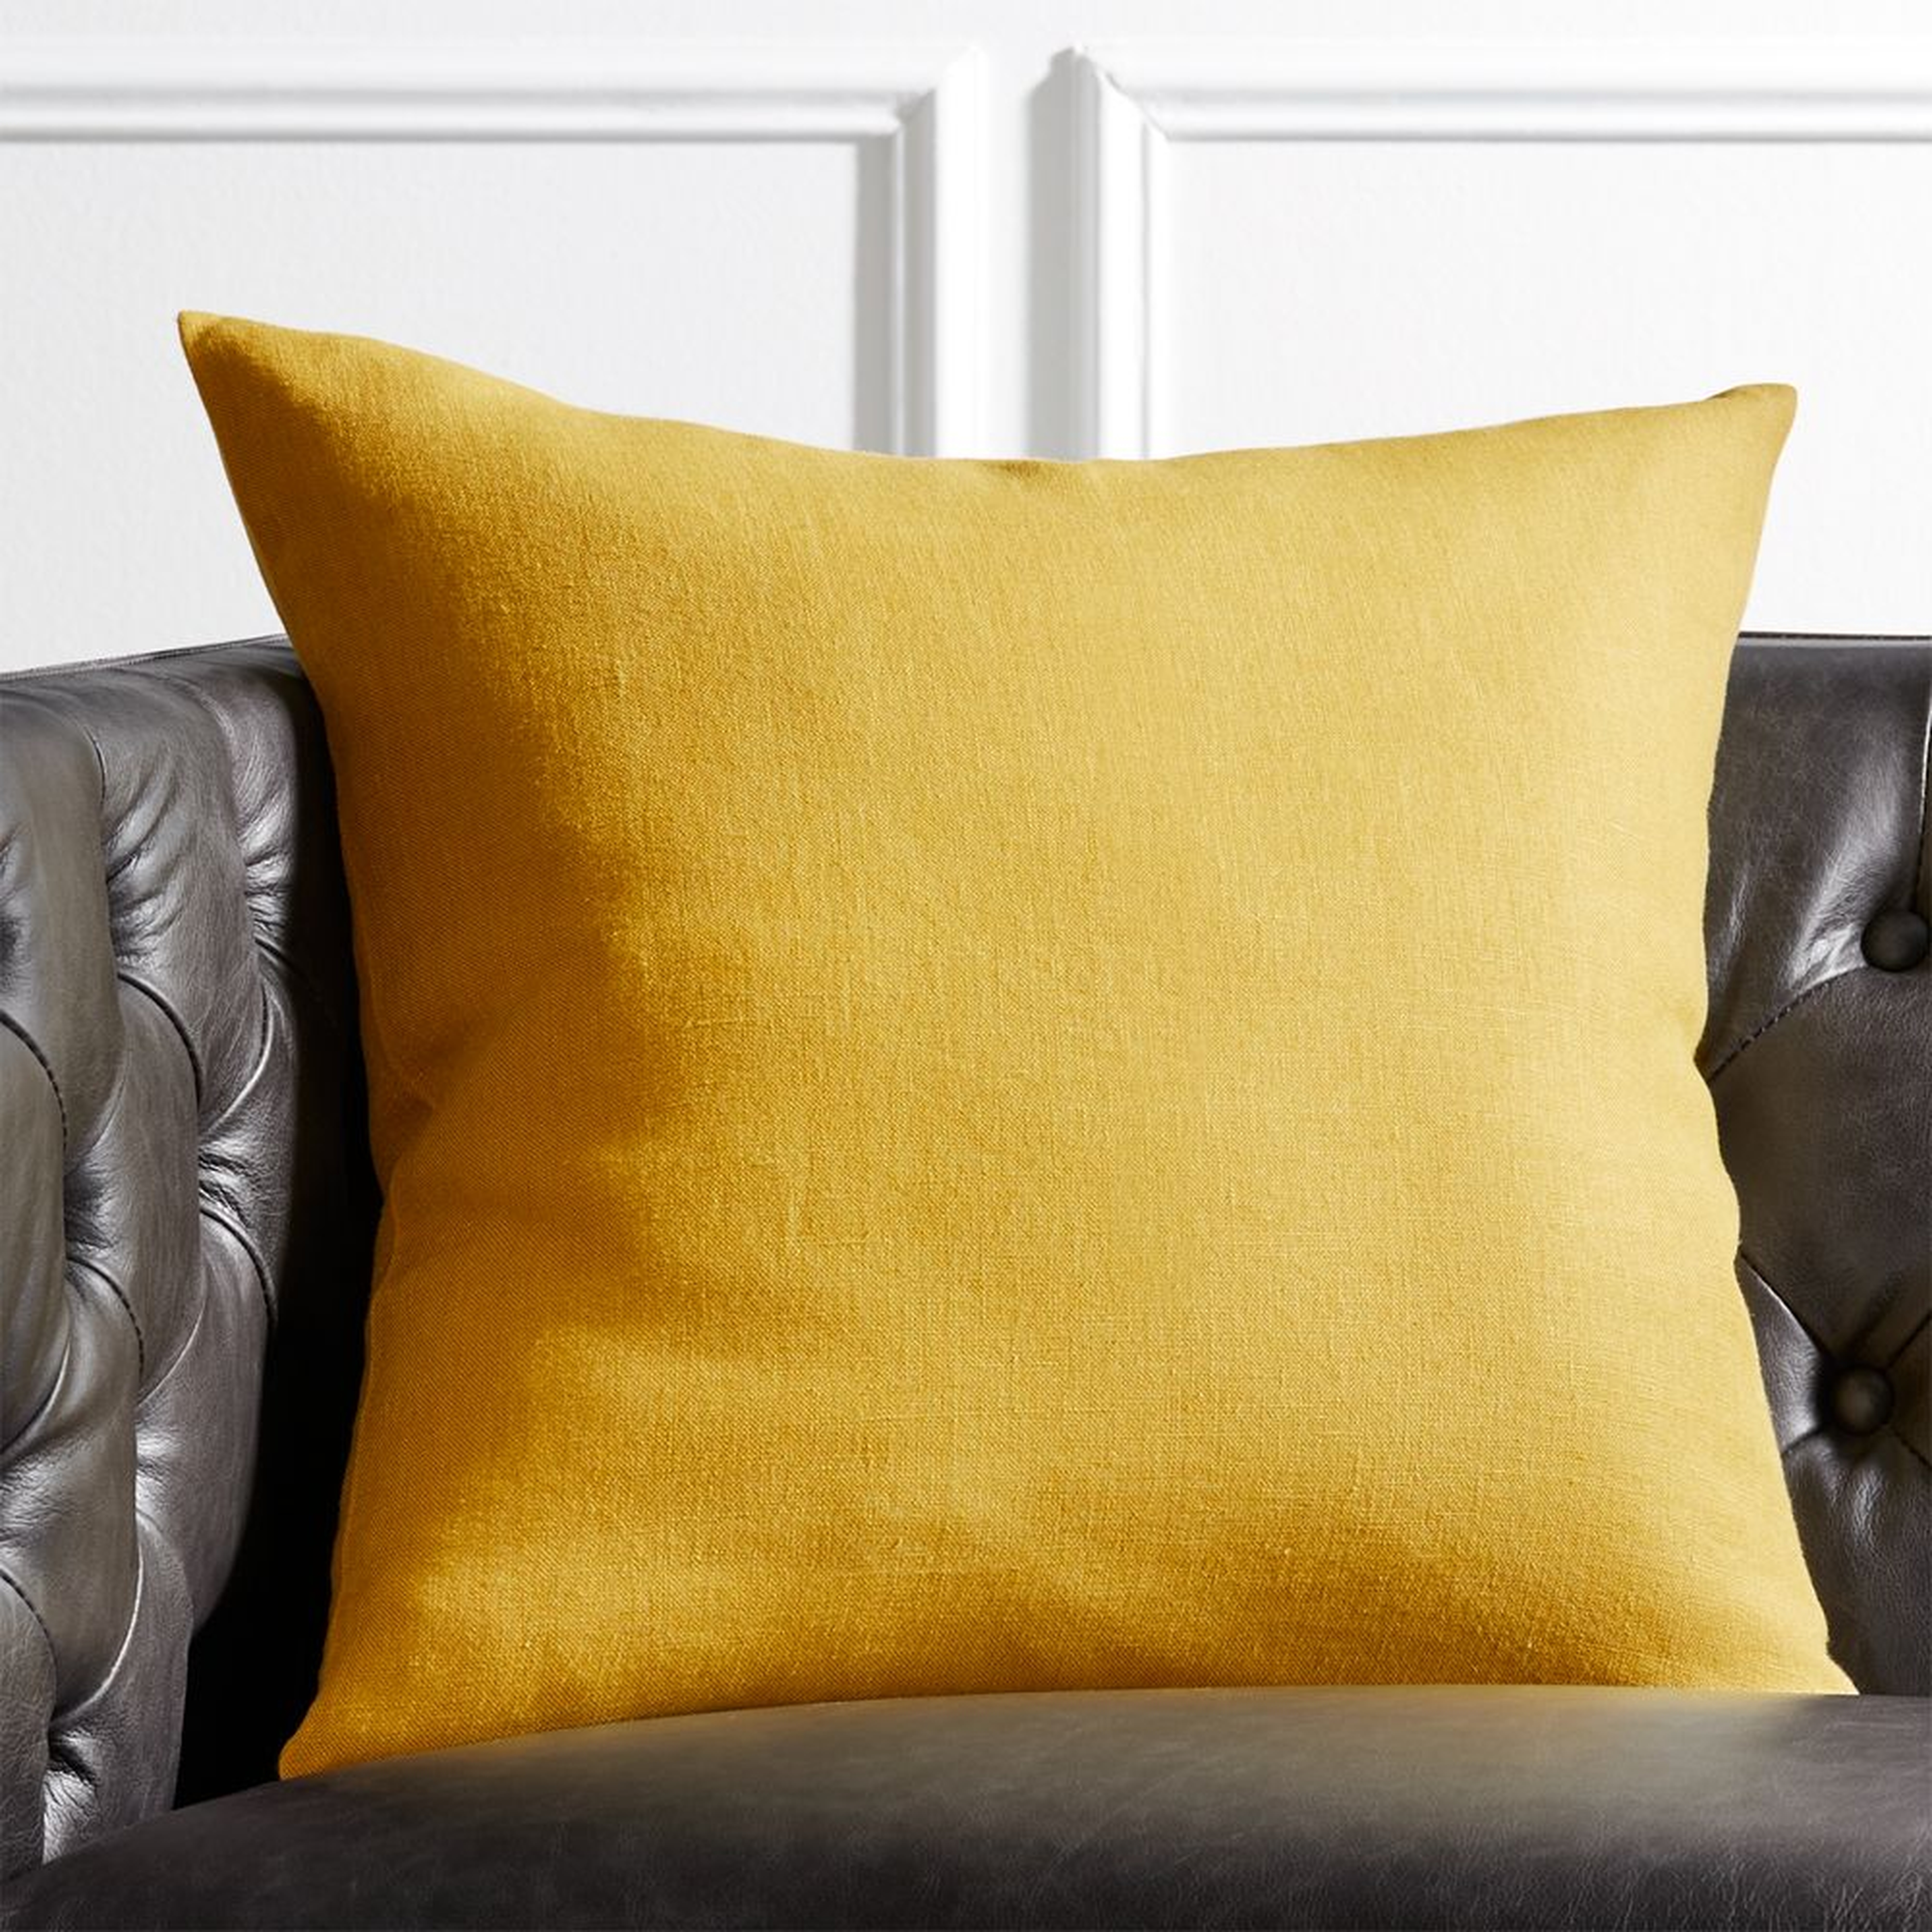 20" Linon Acid Green Pillow with Feather-Down Insert - CB2